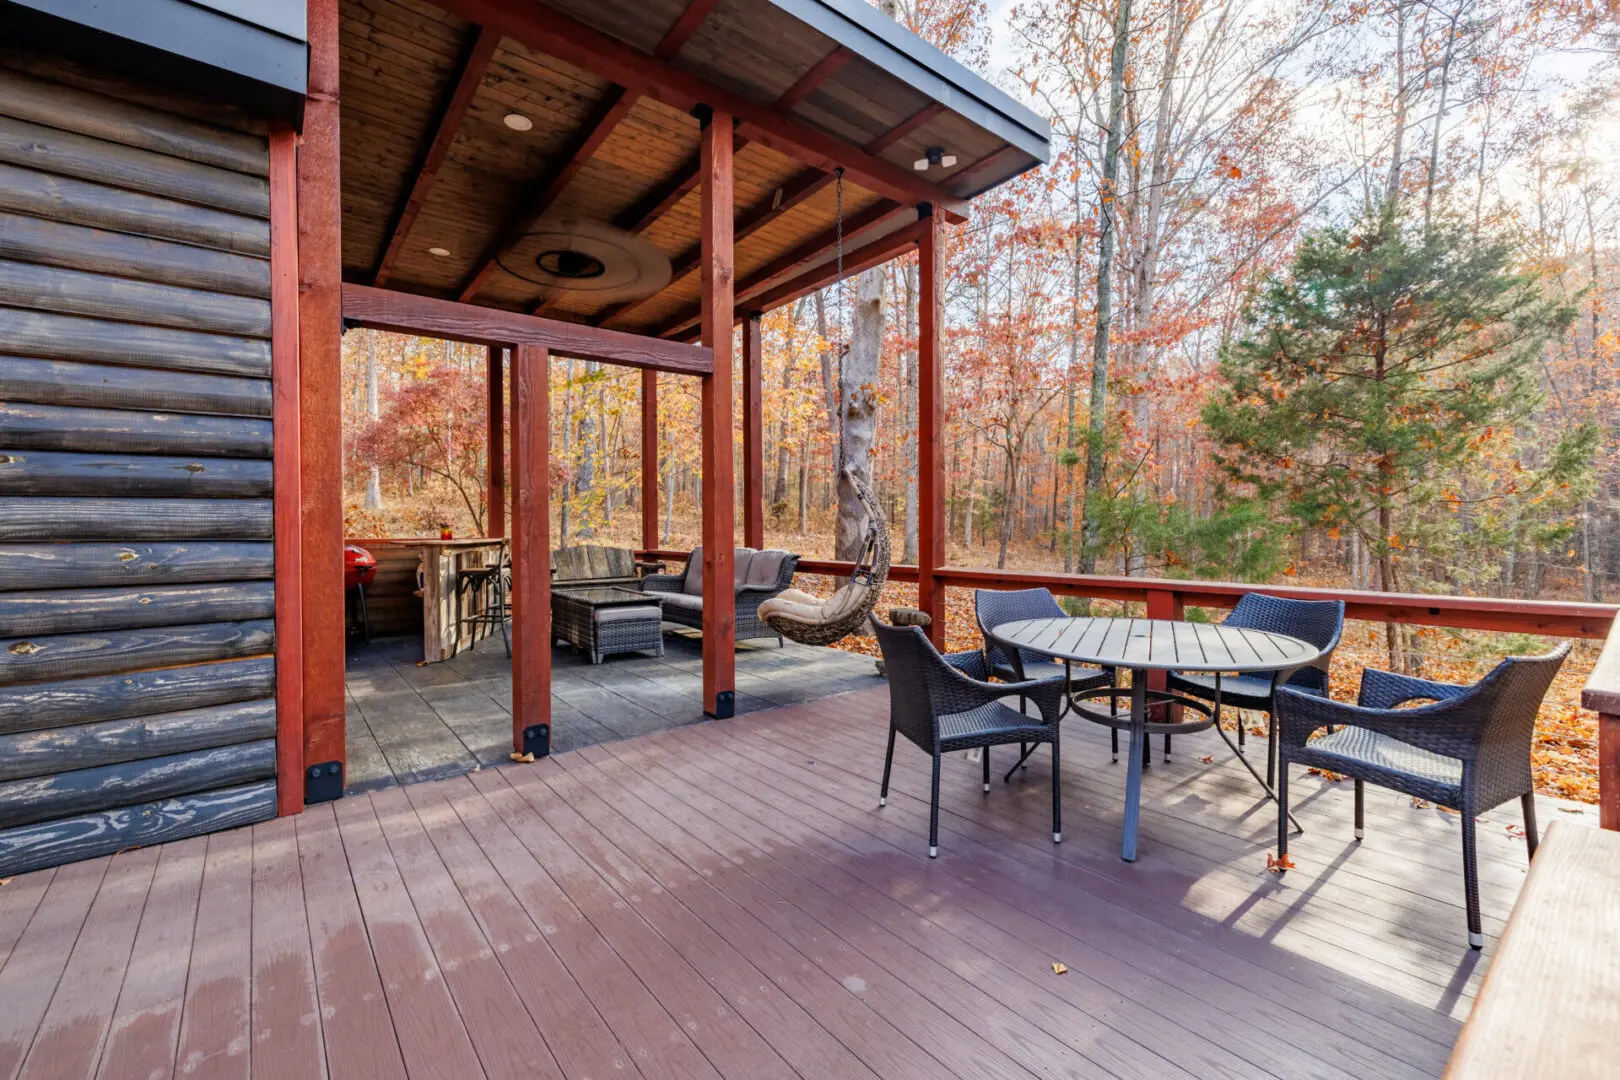 A cozy log cabin nestled in the woods with a deck overlooking the Little River.